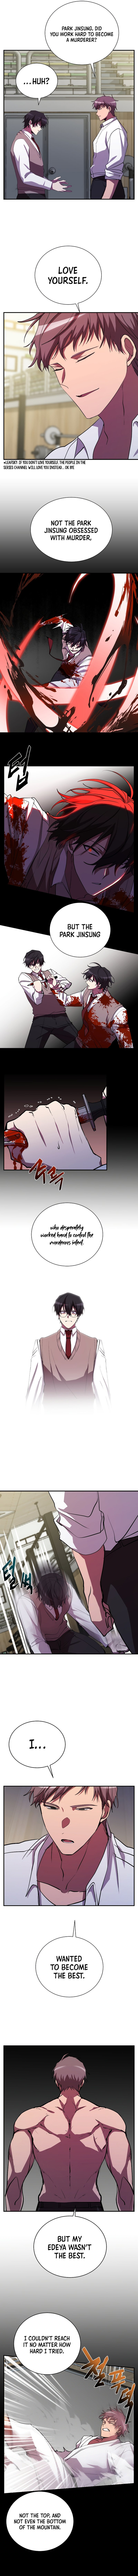 My School Life Pretending To Be a Worthless Person - Chapter 28 Page 8